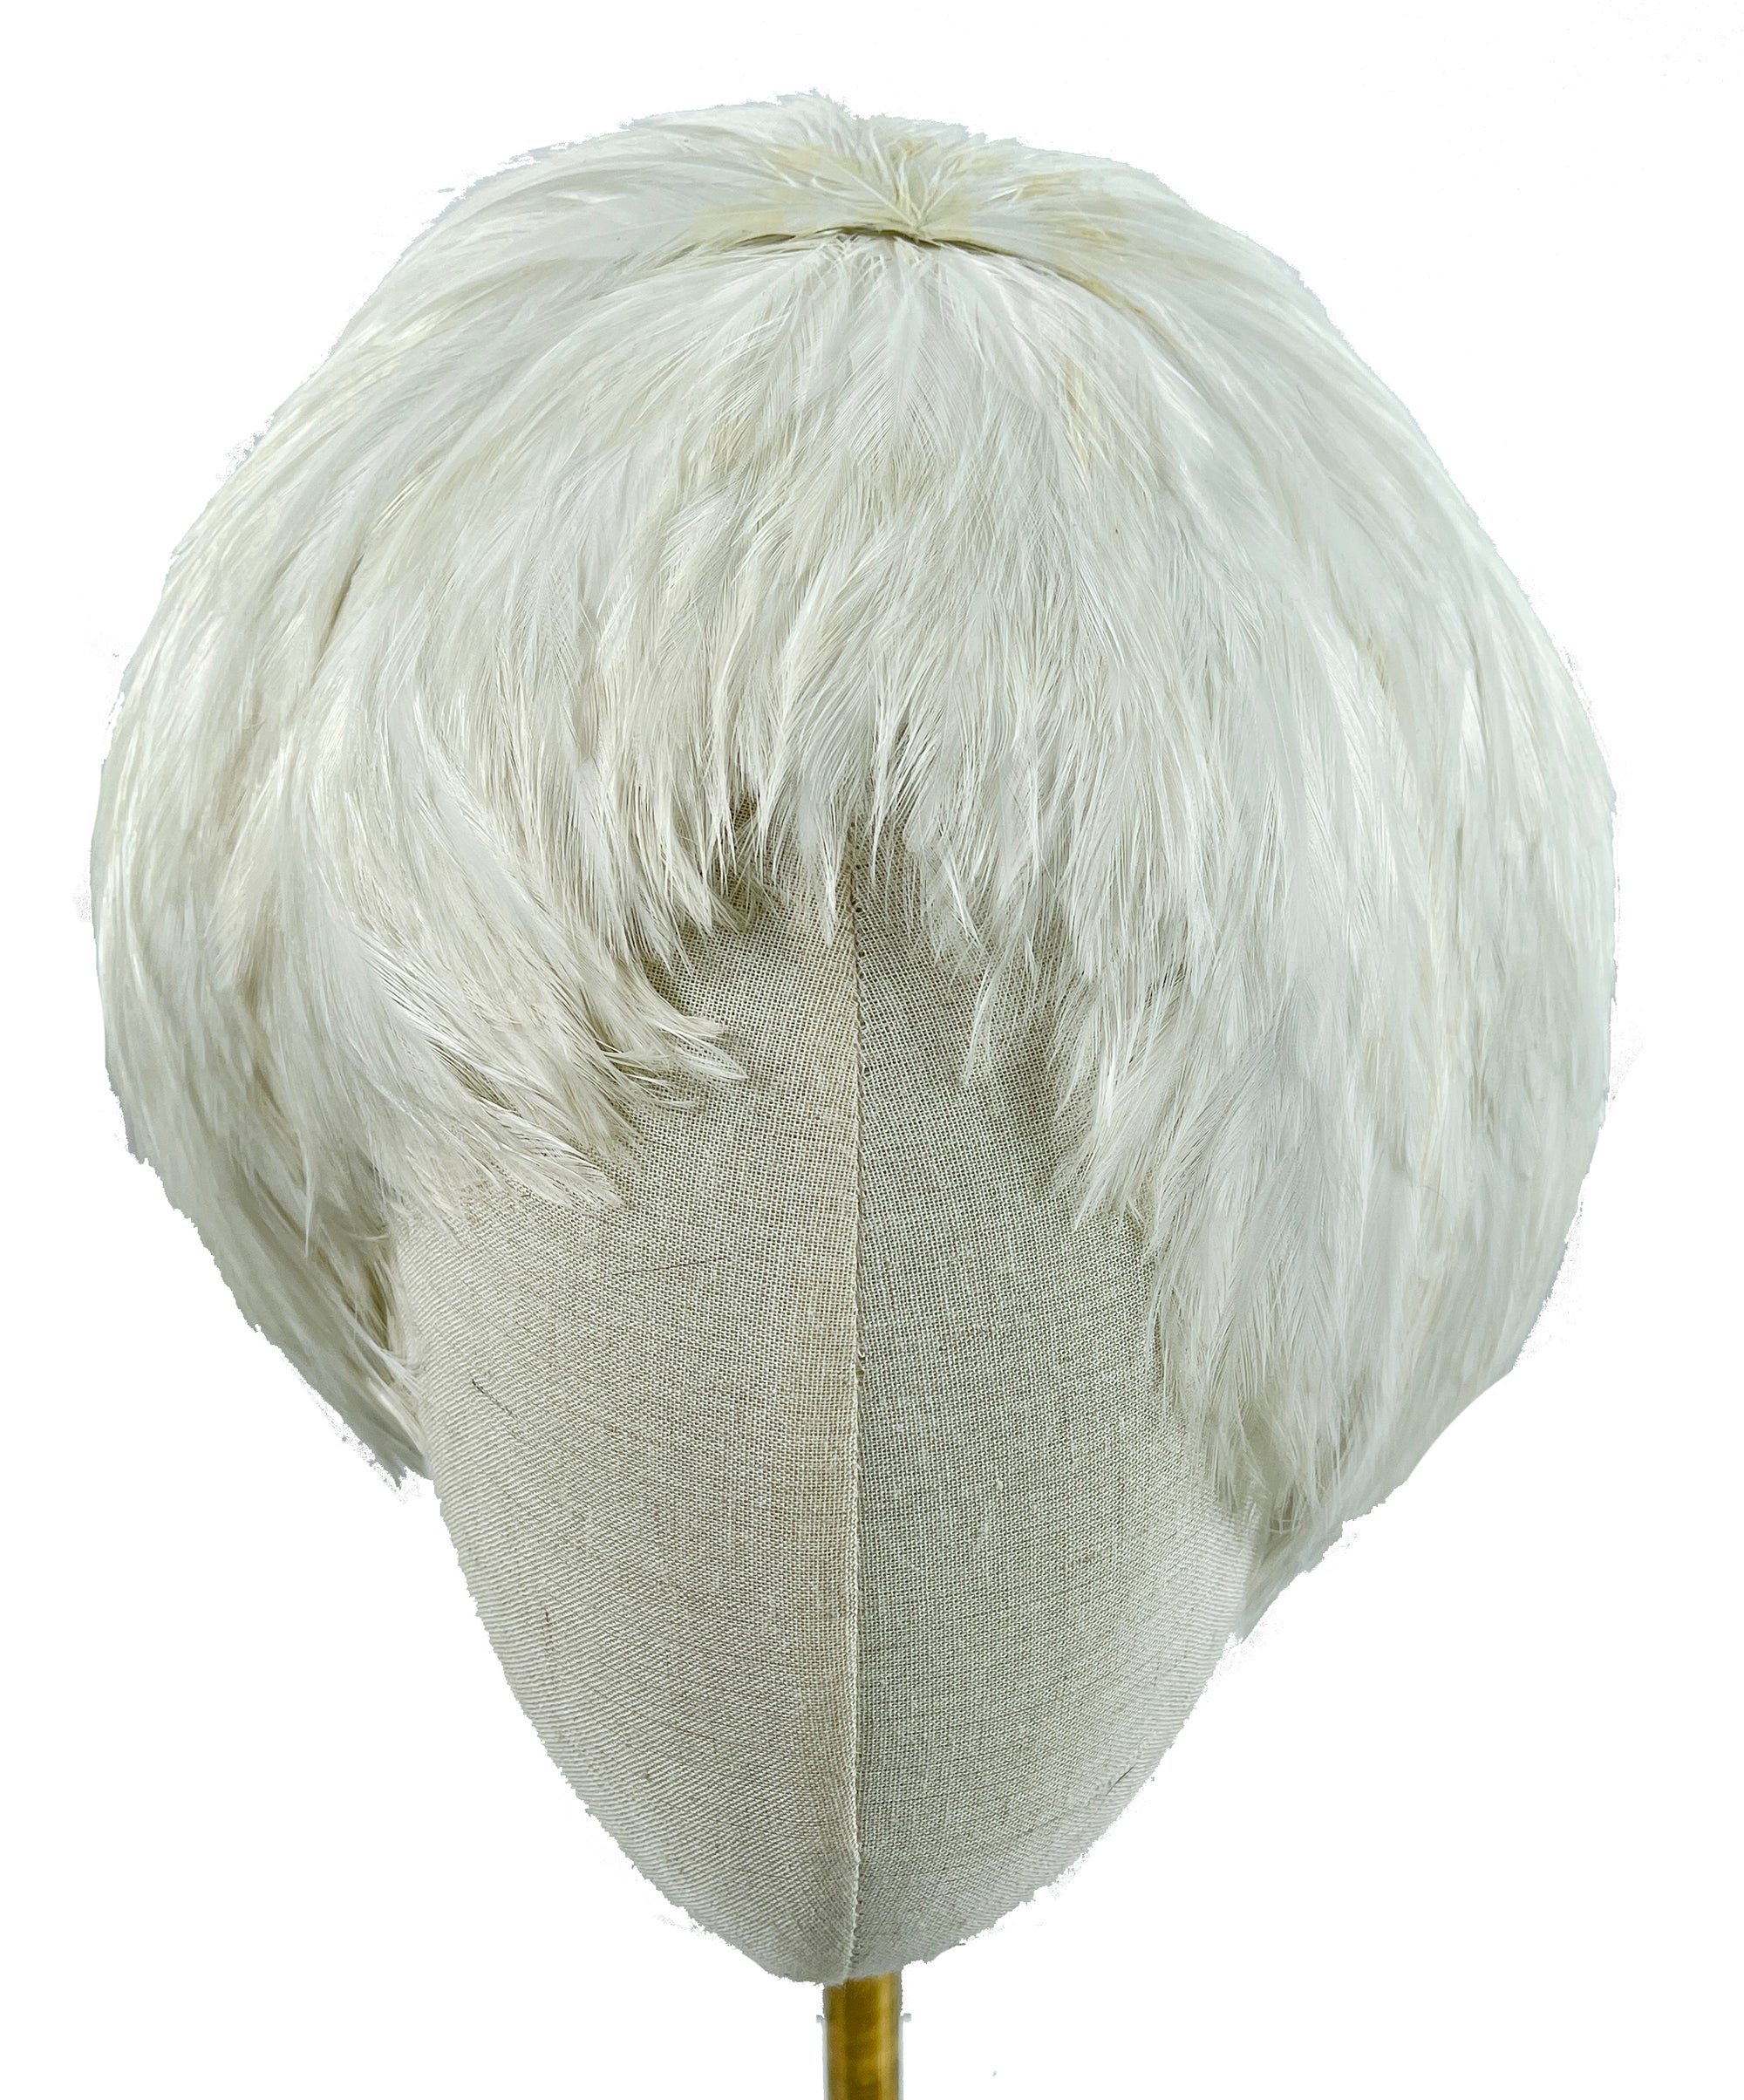 Vintage White Feather Wig Cap by Mr D